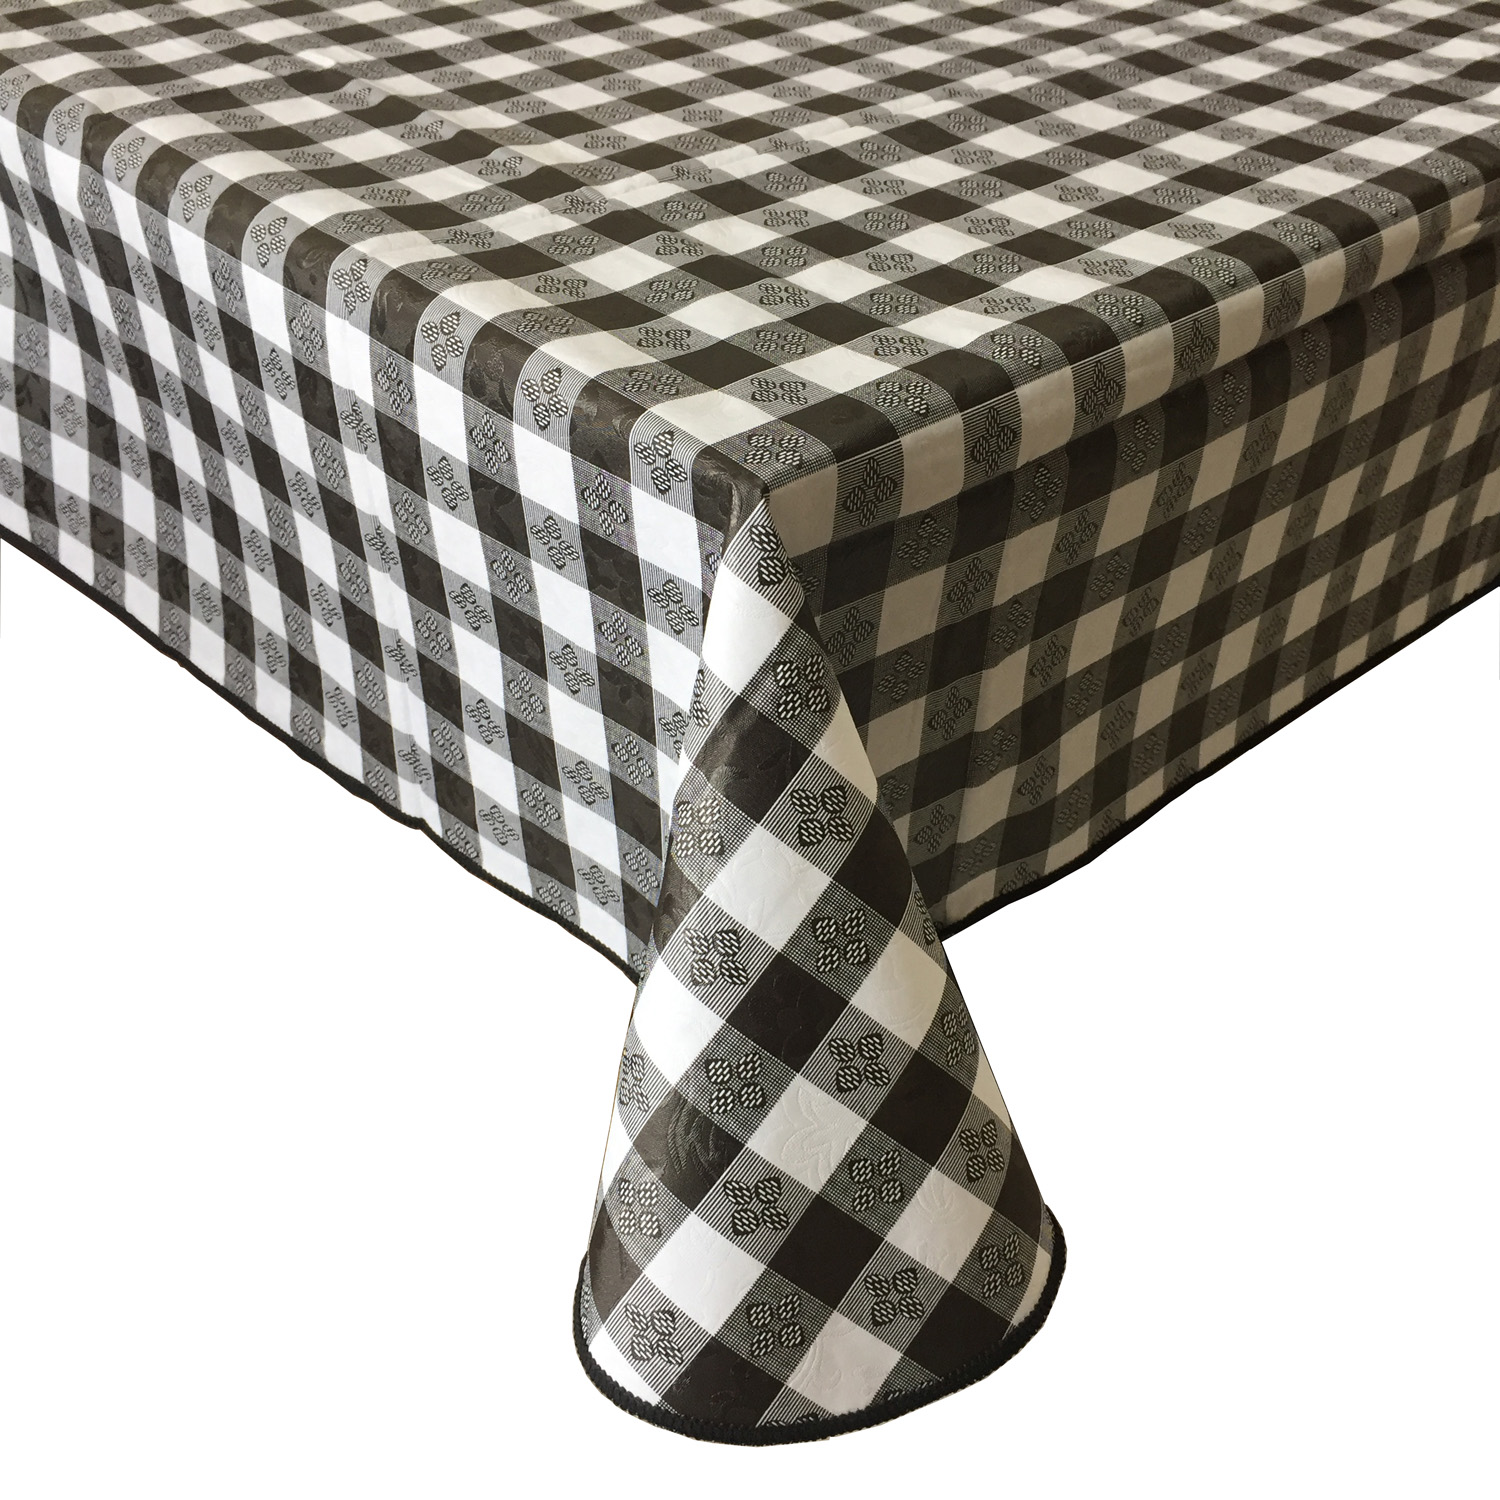 CAC China TCVG-52K Black Vinyl Table Cover with Flannel Back 52" x 52"